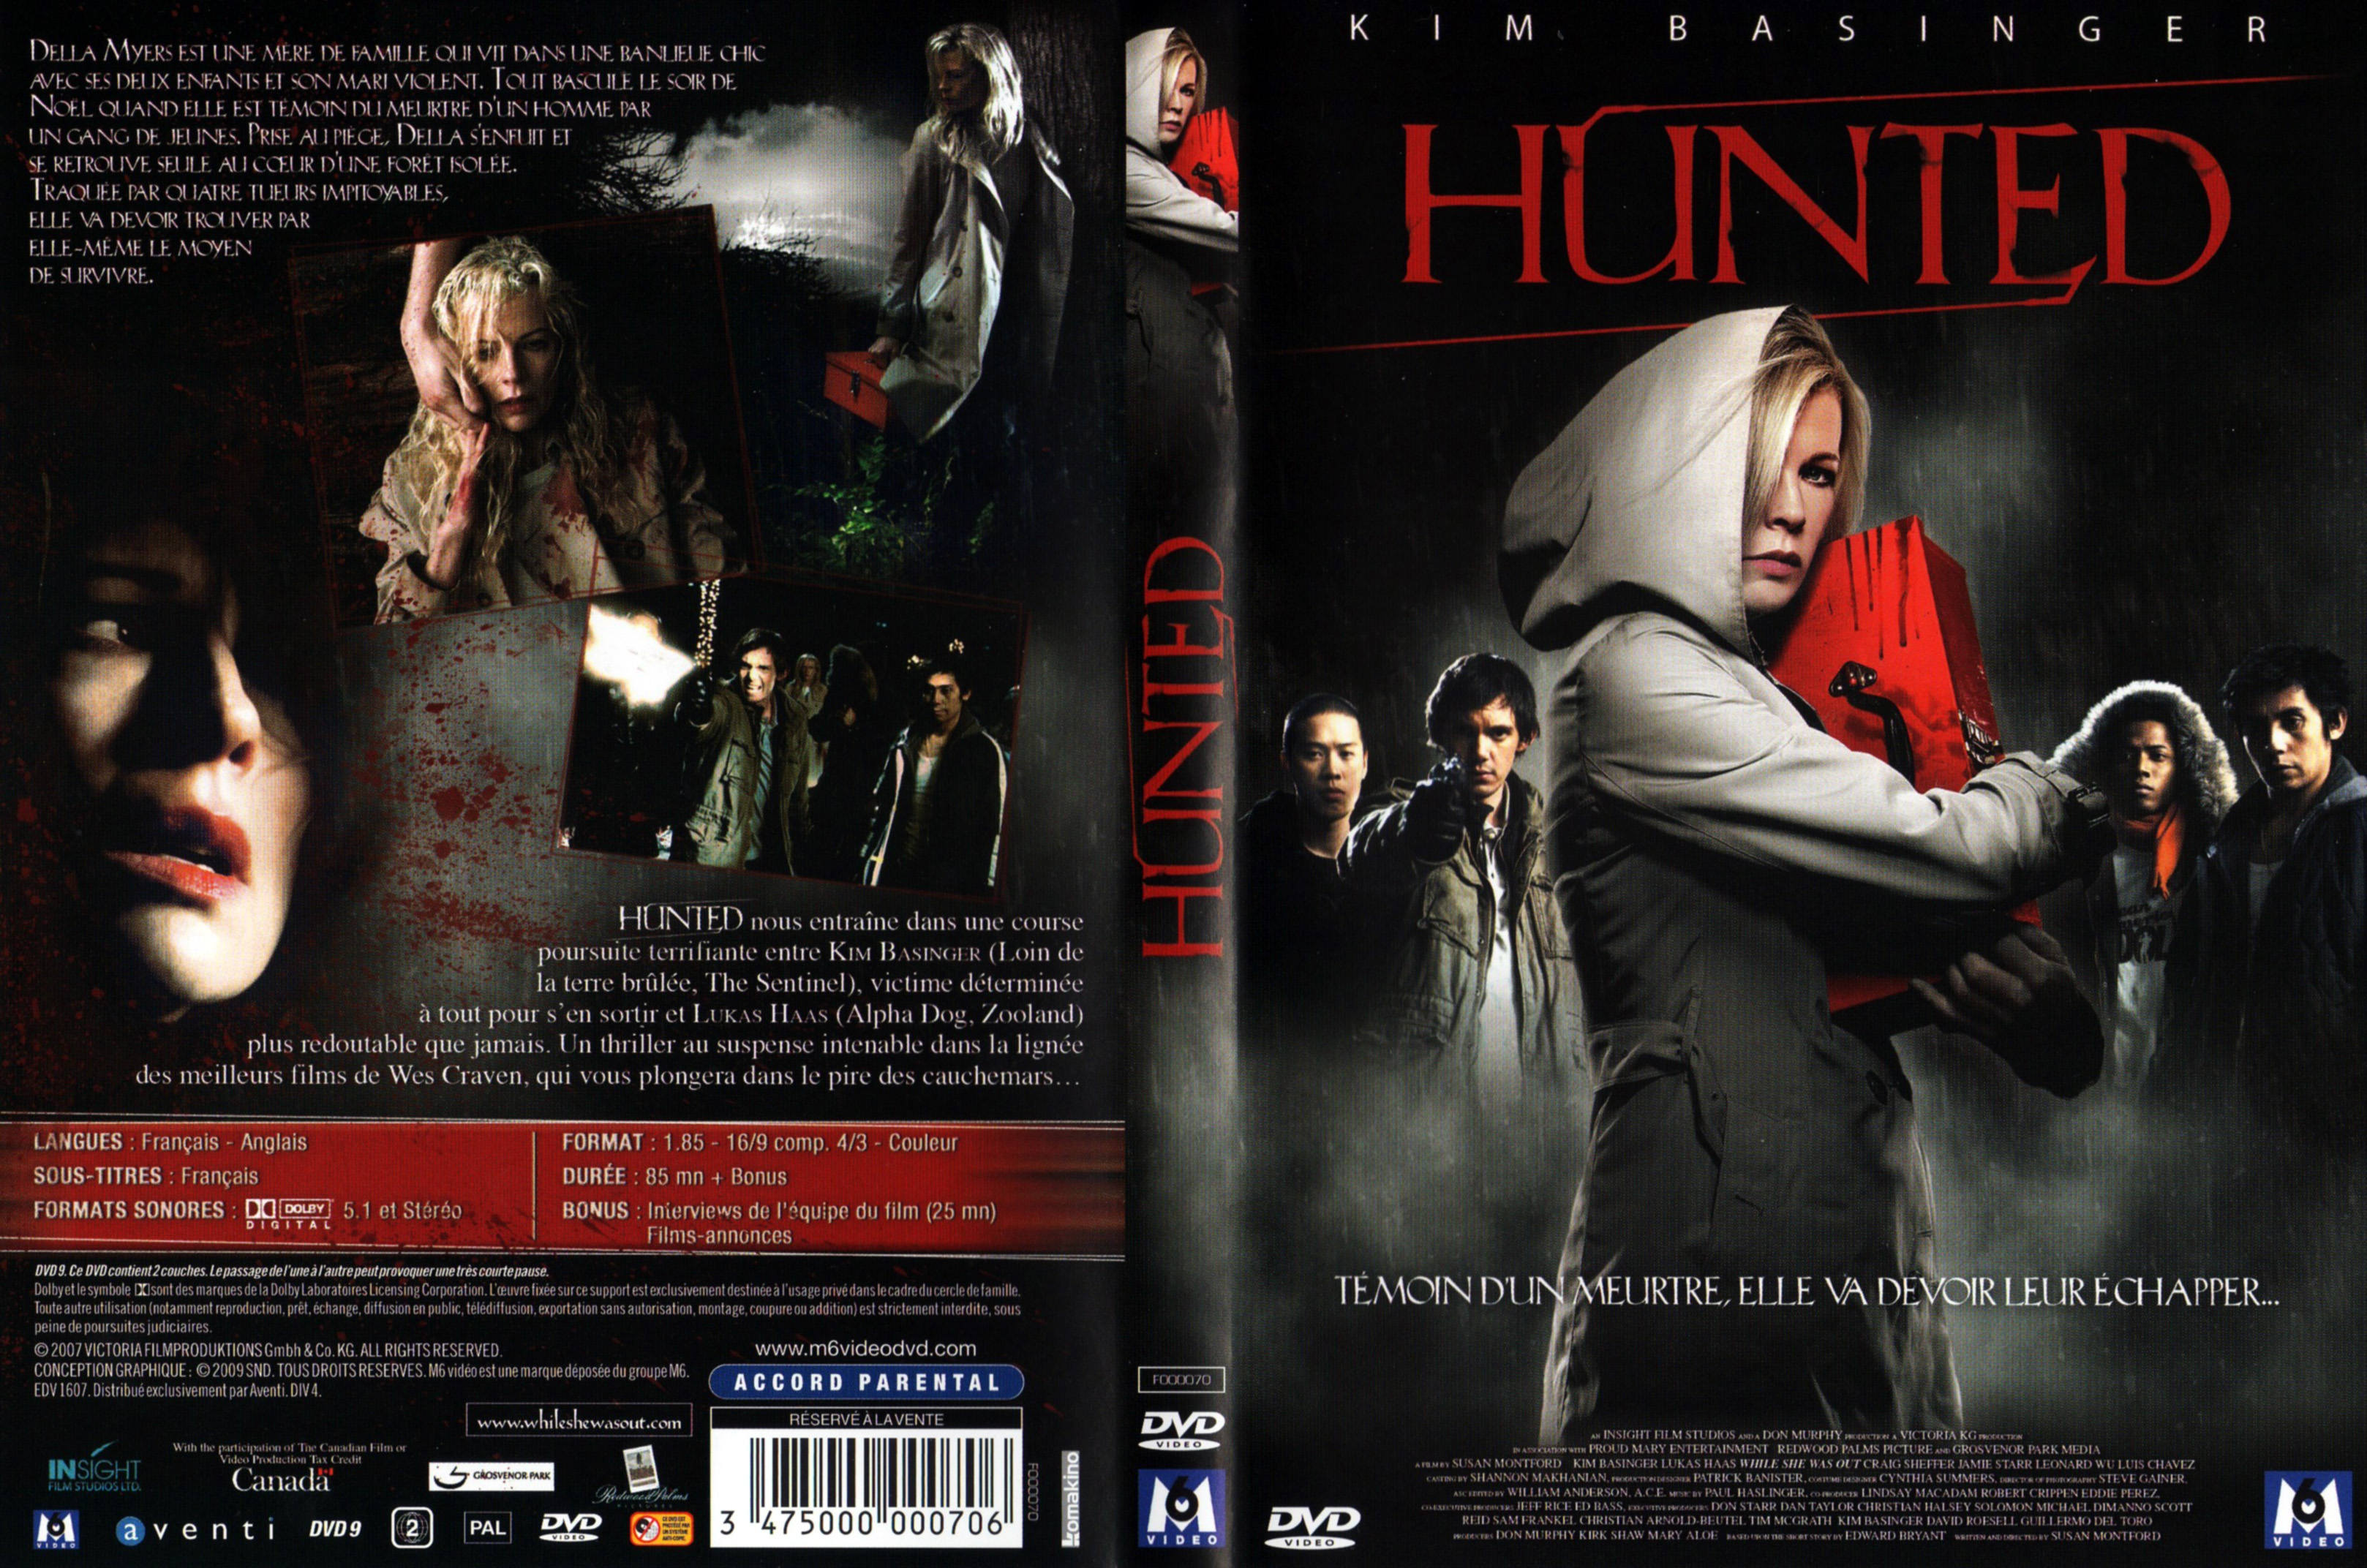 Jaquette DVD Hunted